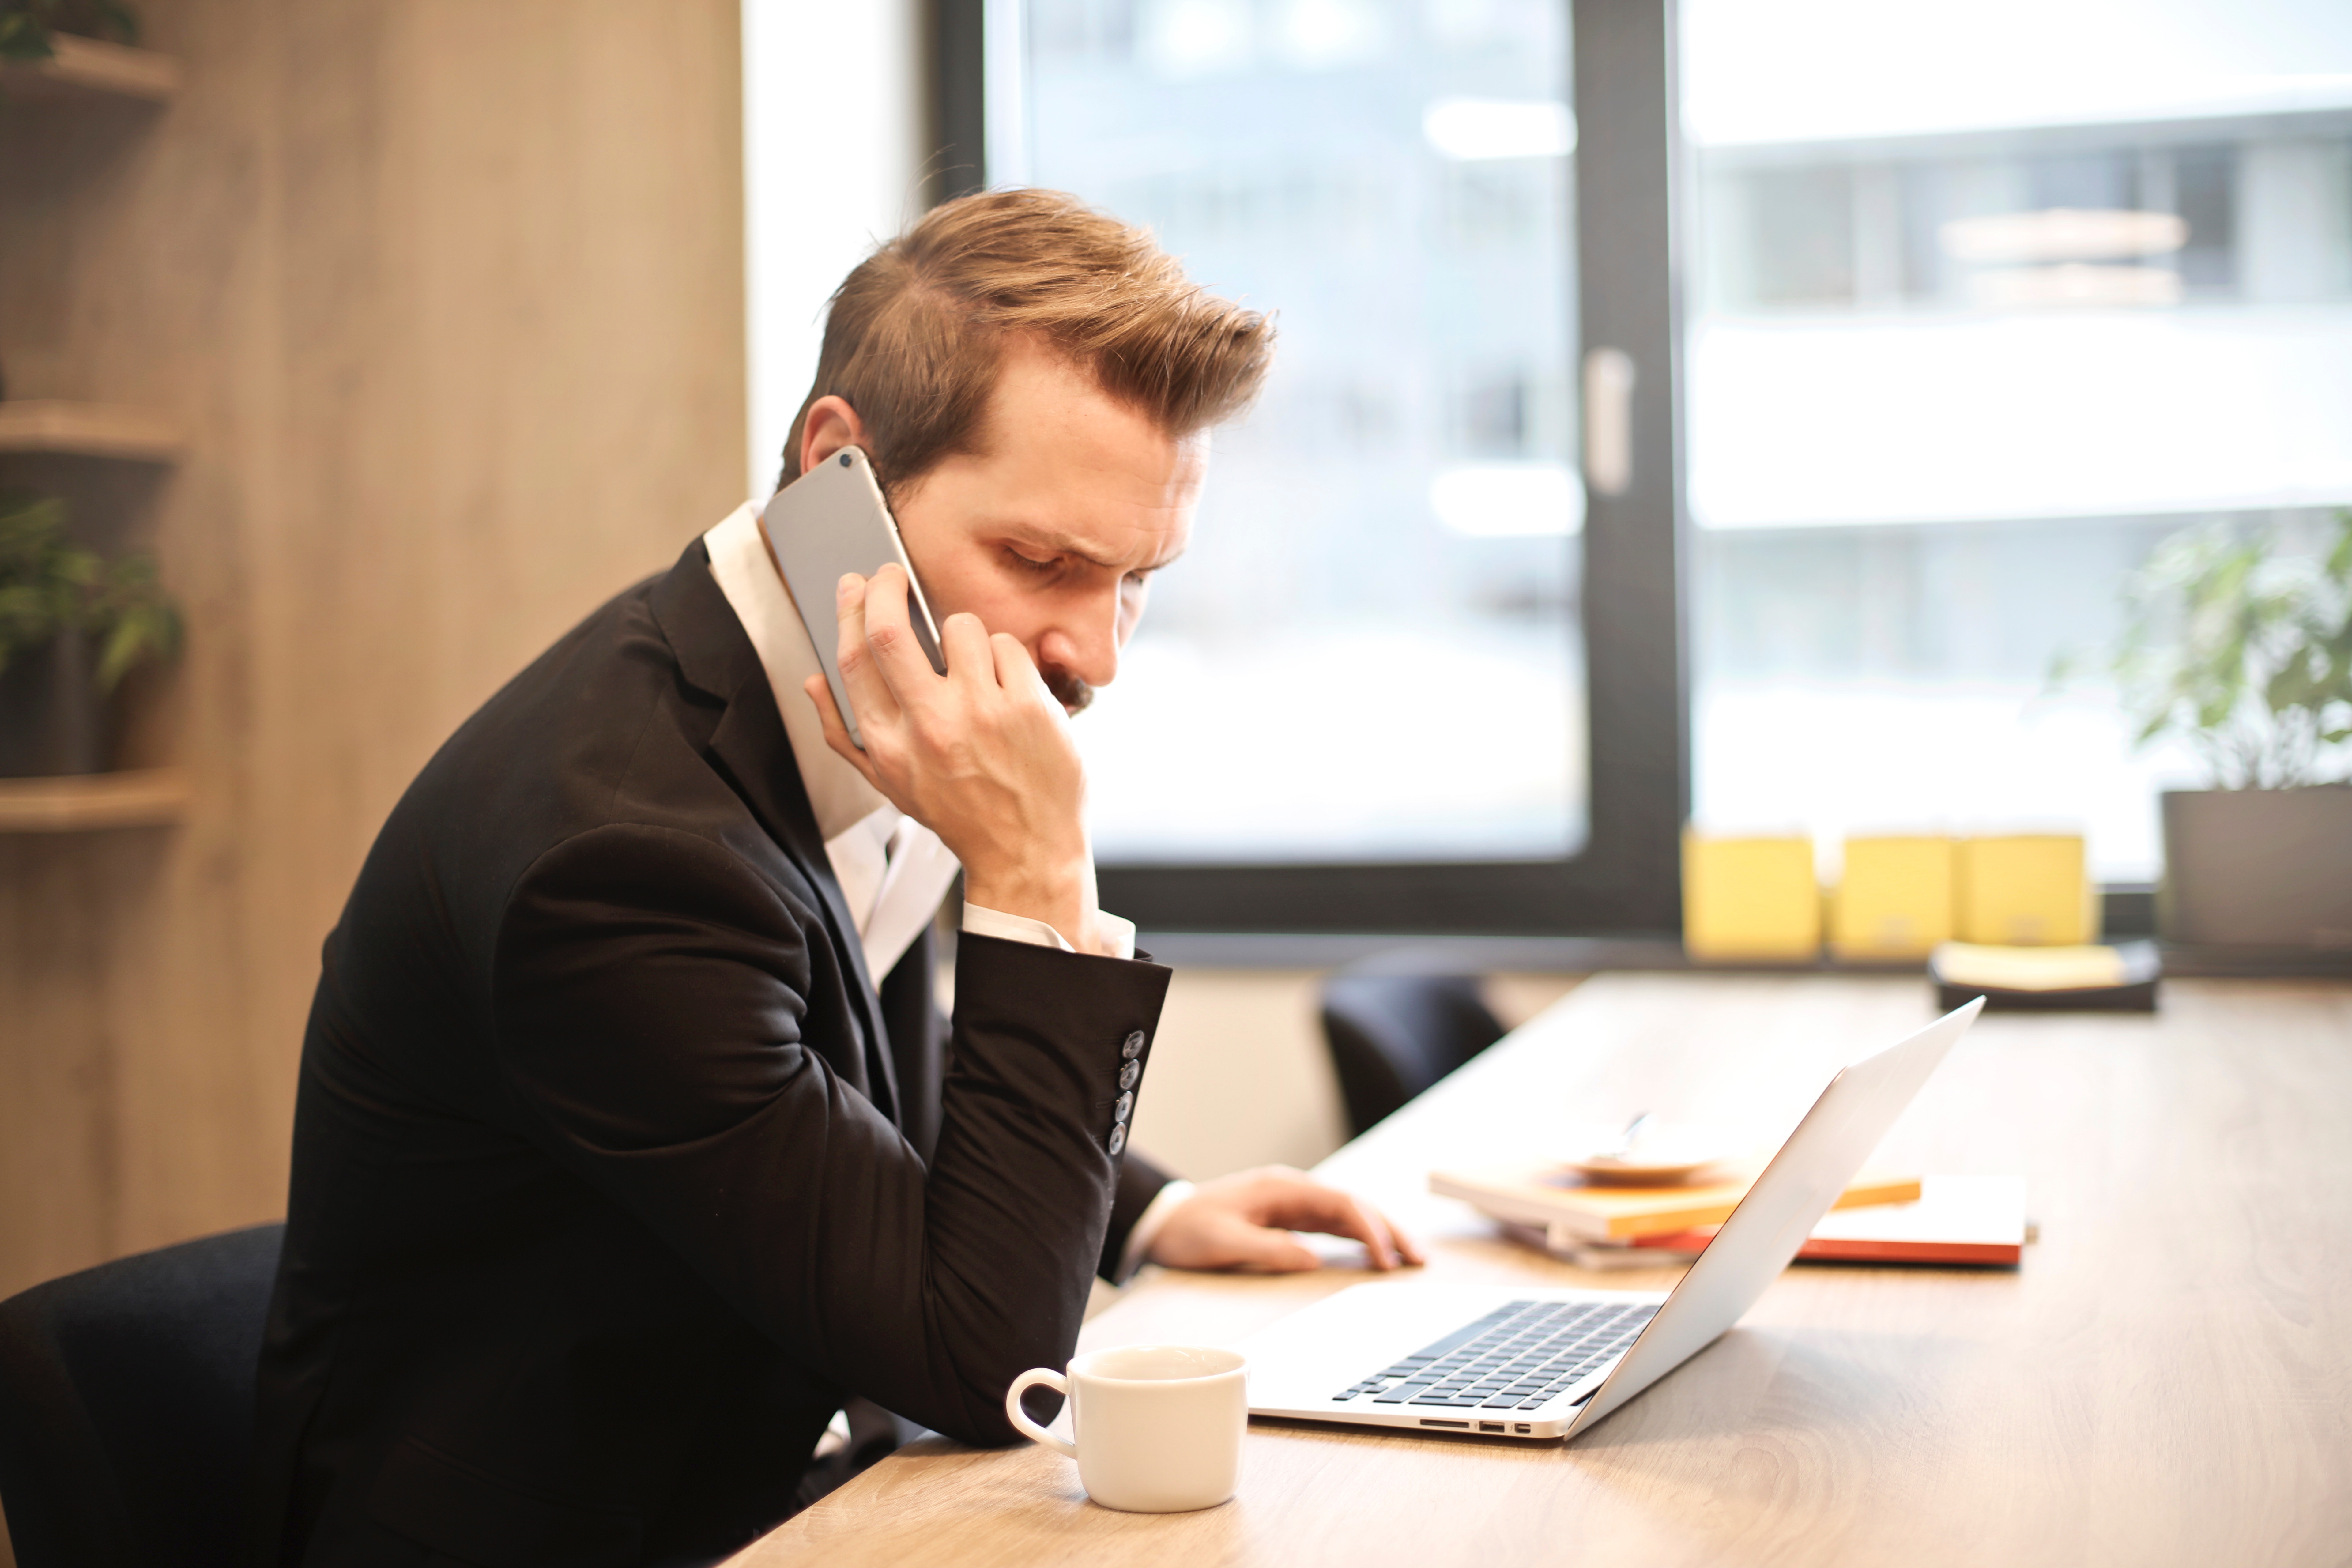 Man Having a Phone Call In-front of a Laptop, Calling, Mobile phone, Window, Wear, HQ Photo